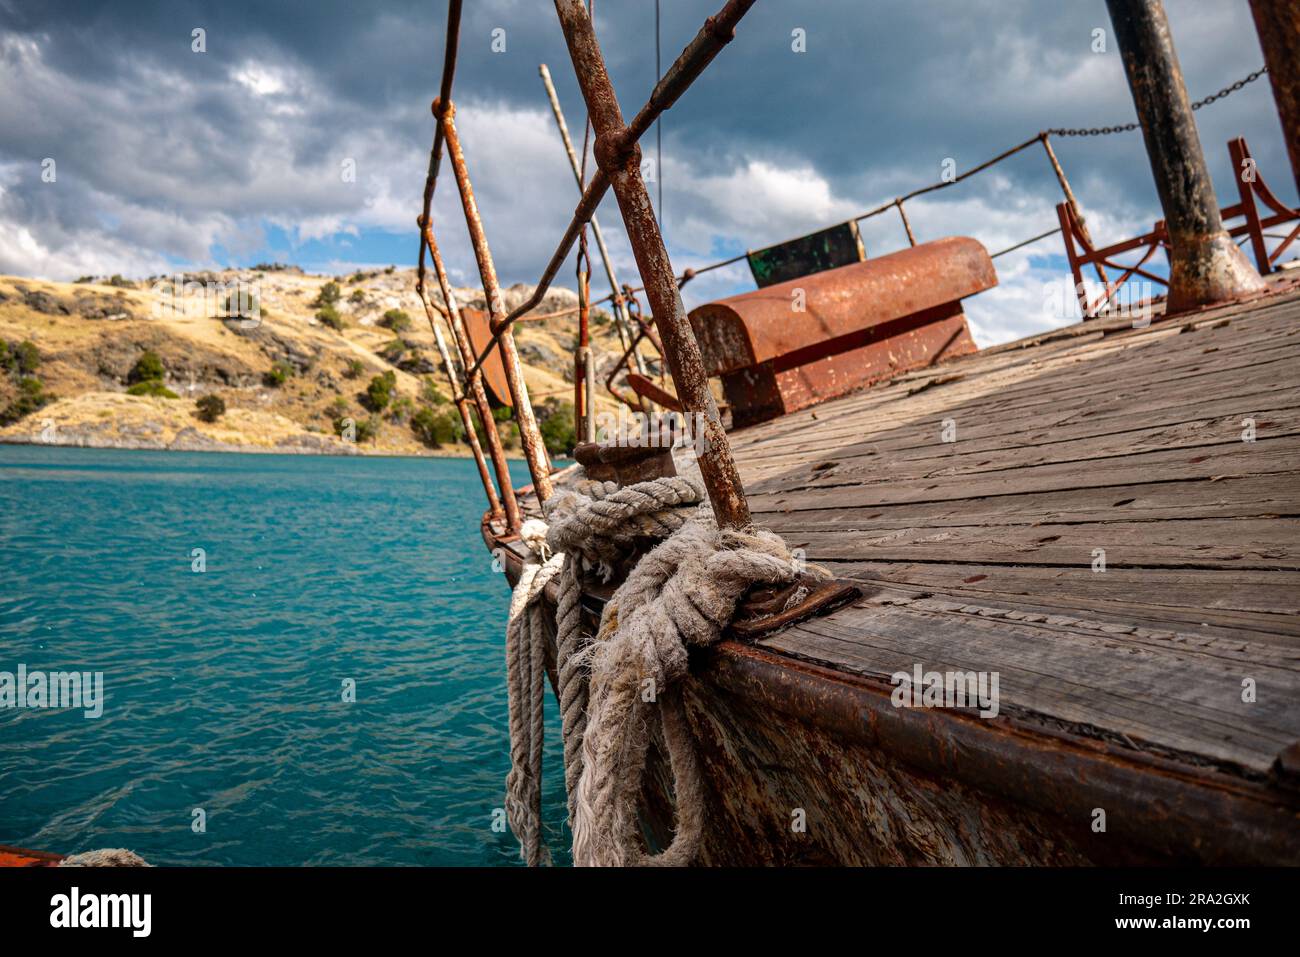 Abandoned ship in patagonia, Chile. Stock Photo